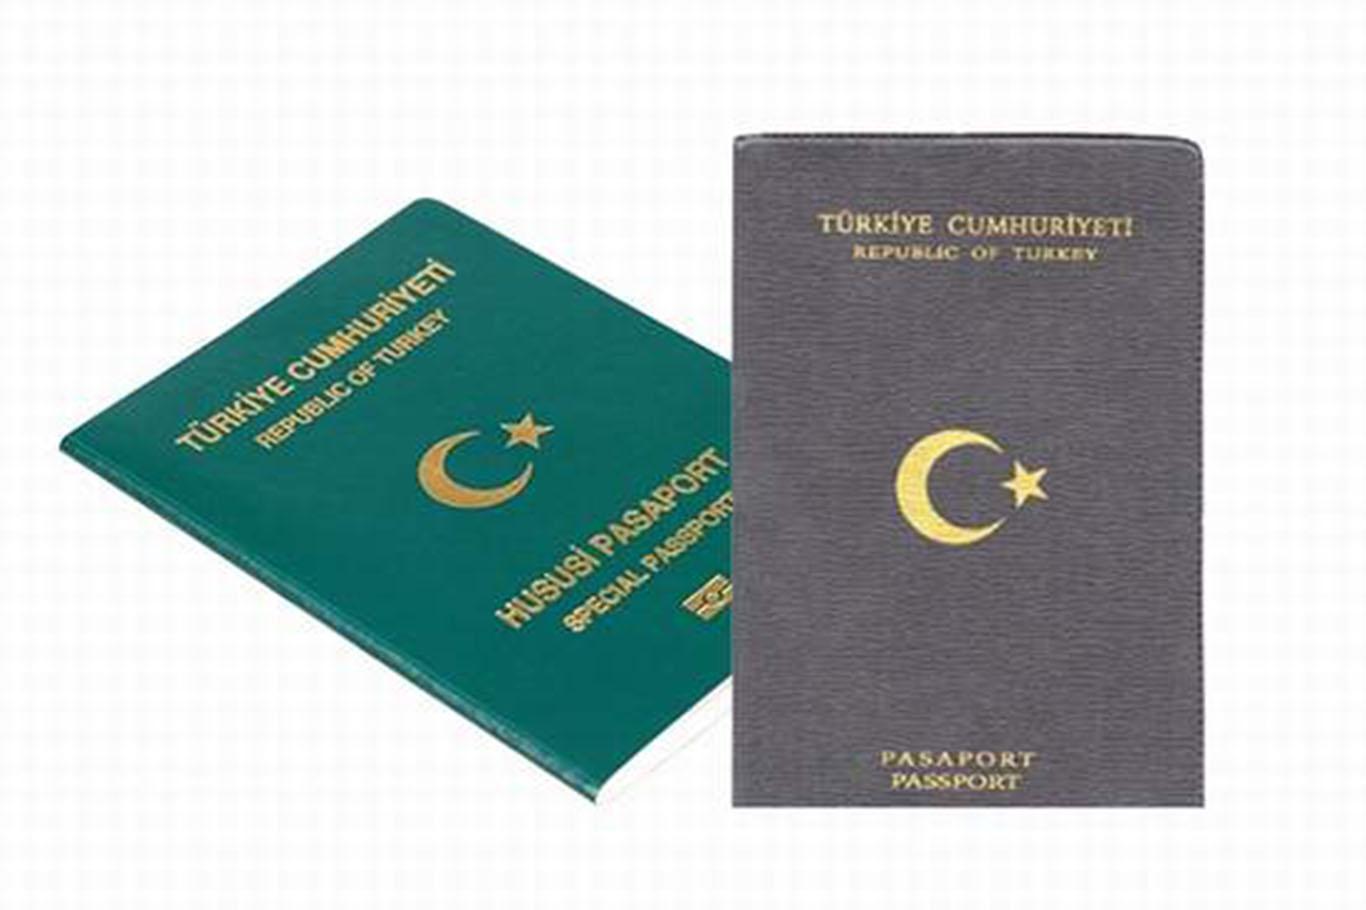 No need for holders of Turkey's service, special passports to receive EU approval